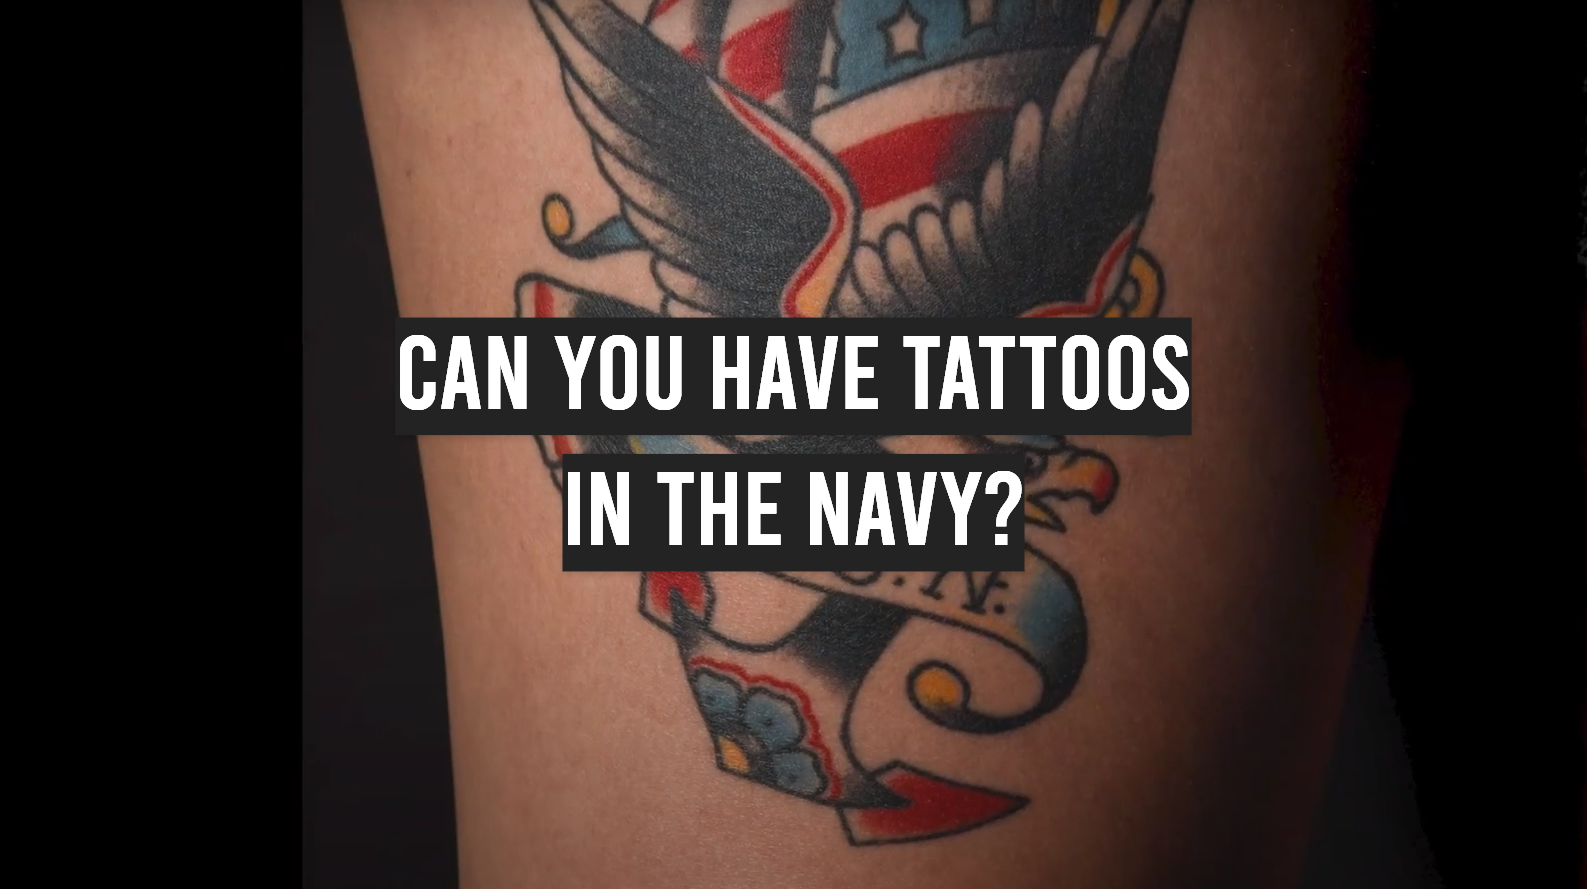 Can You Have Tattoos in the Navy? - TattooProfy